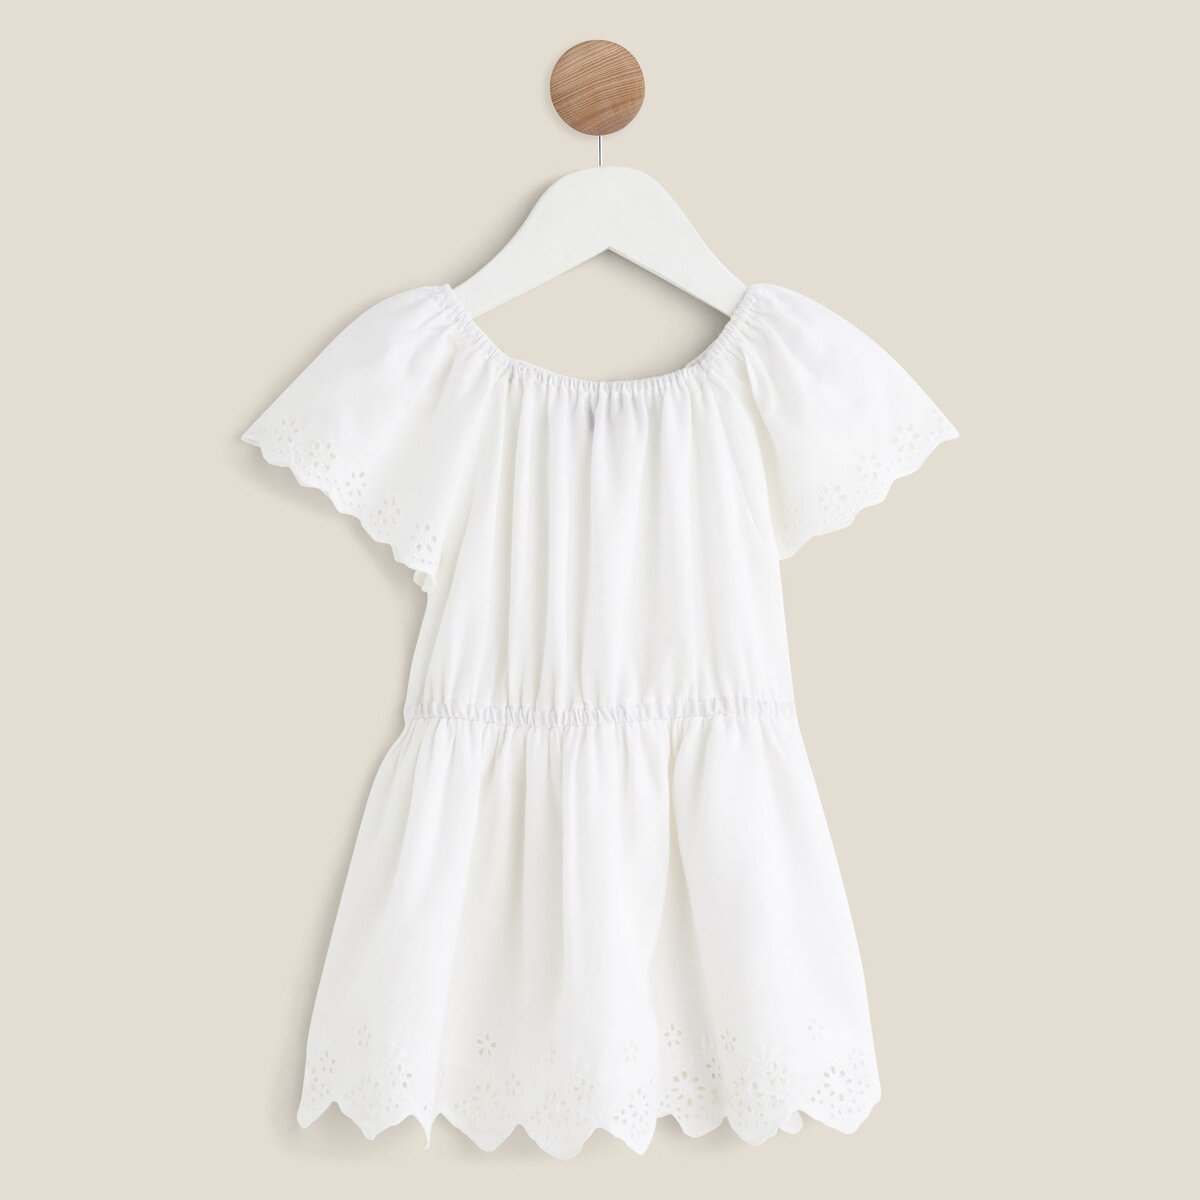 IN EXTENSO Robe broderie bébé fille